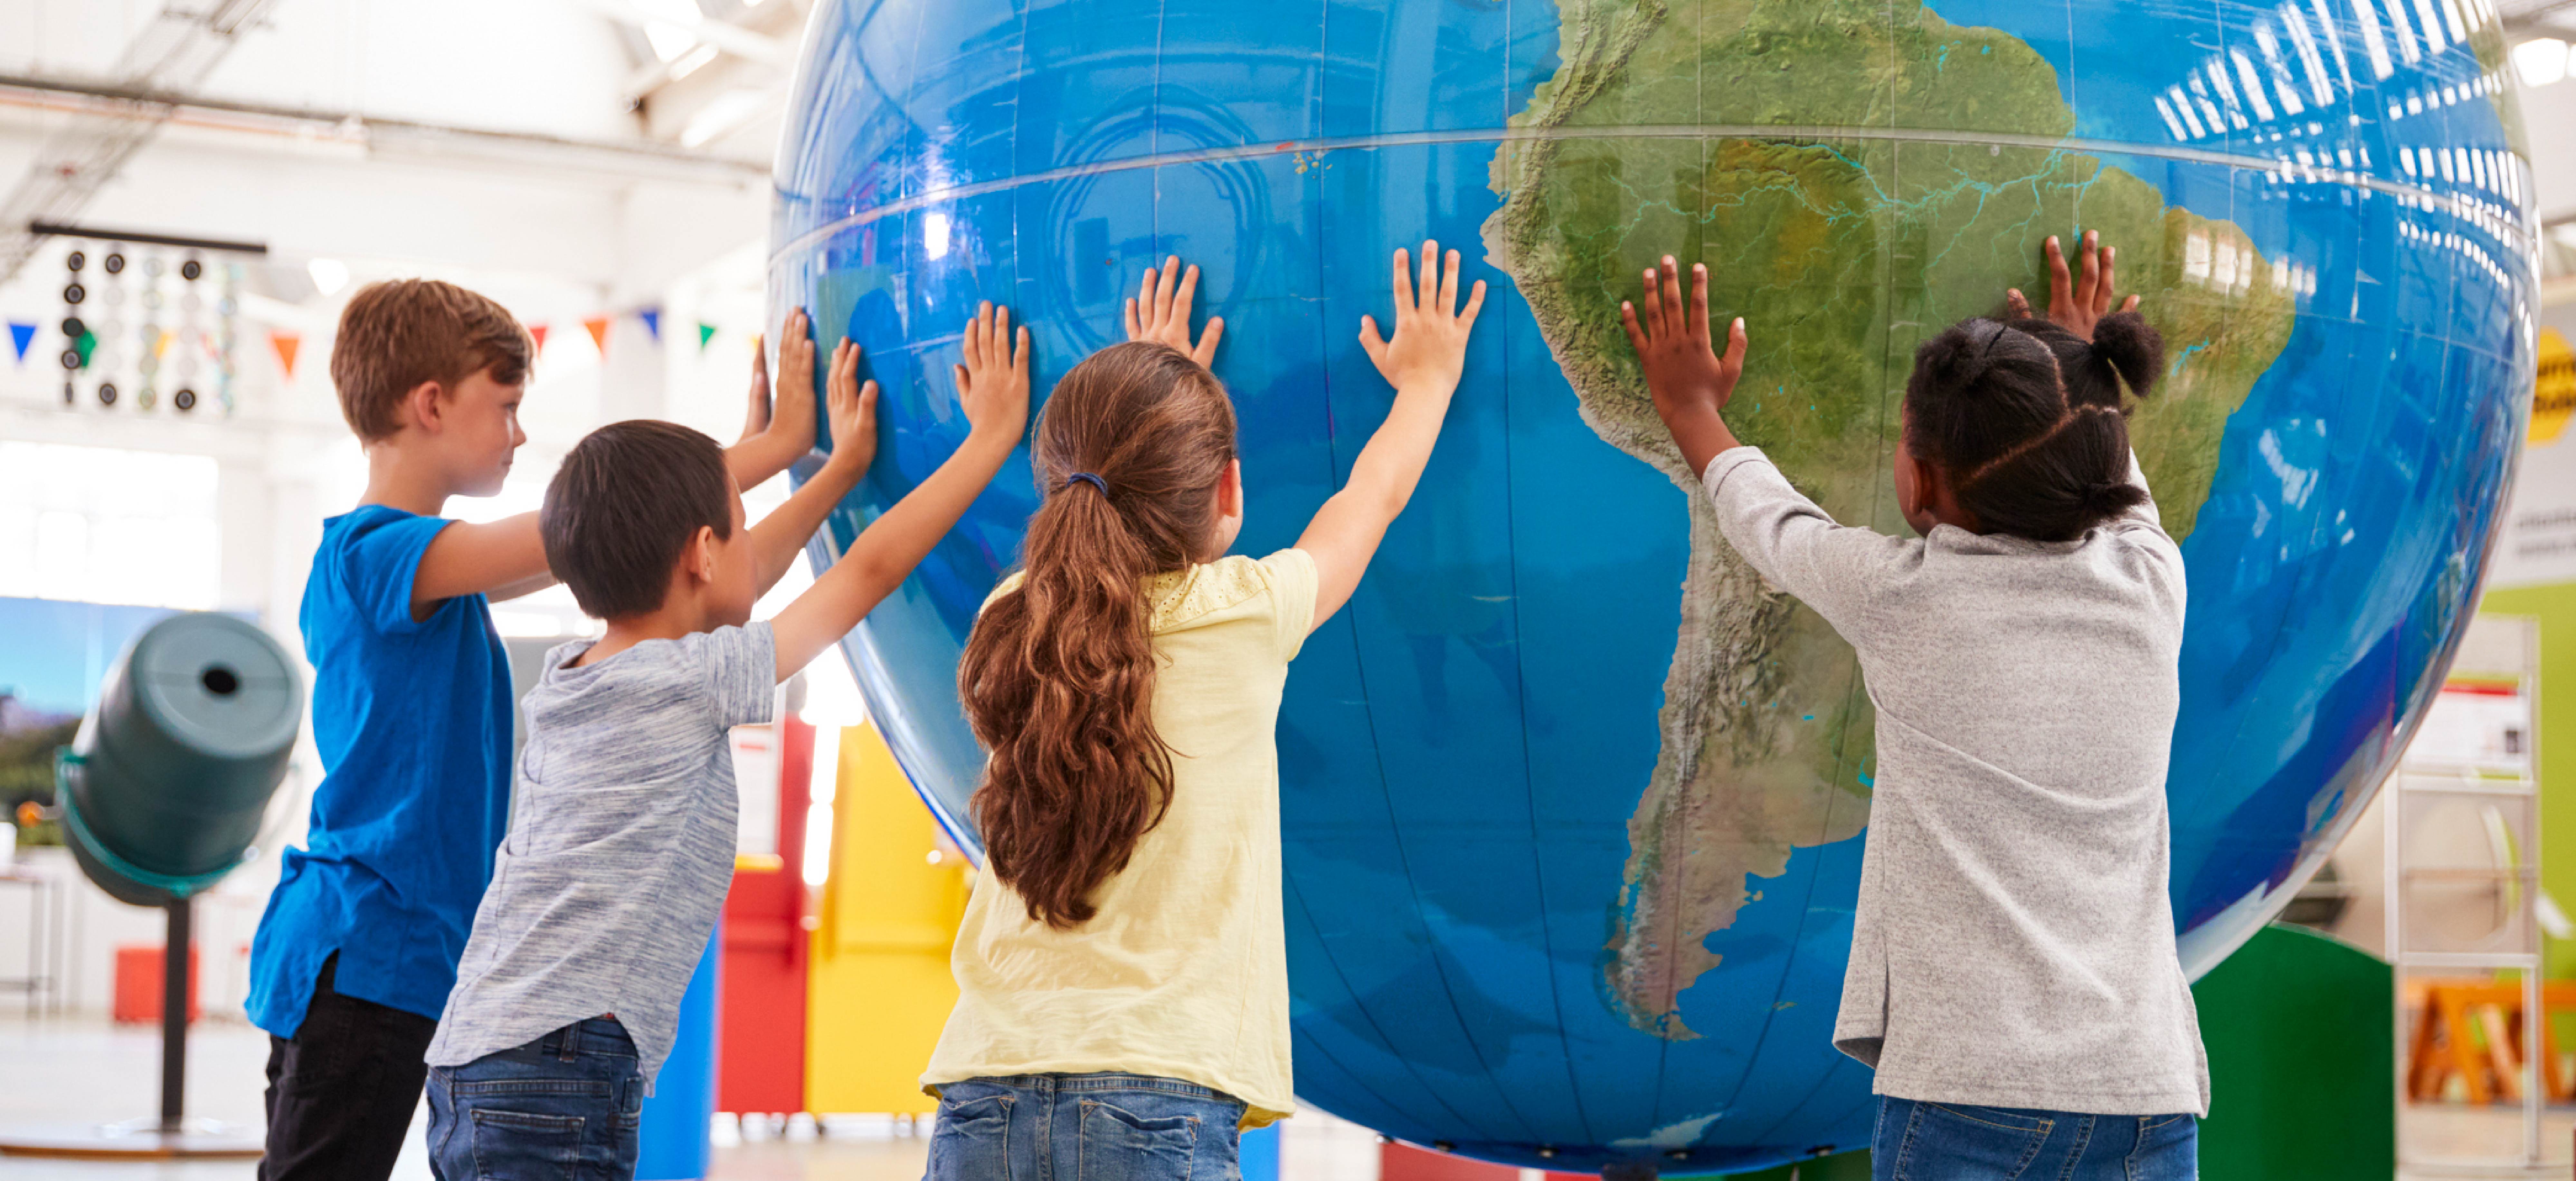 children surrounding a large globe with their hands up against it